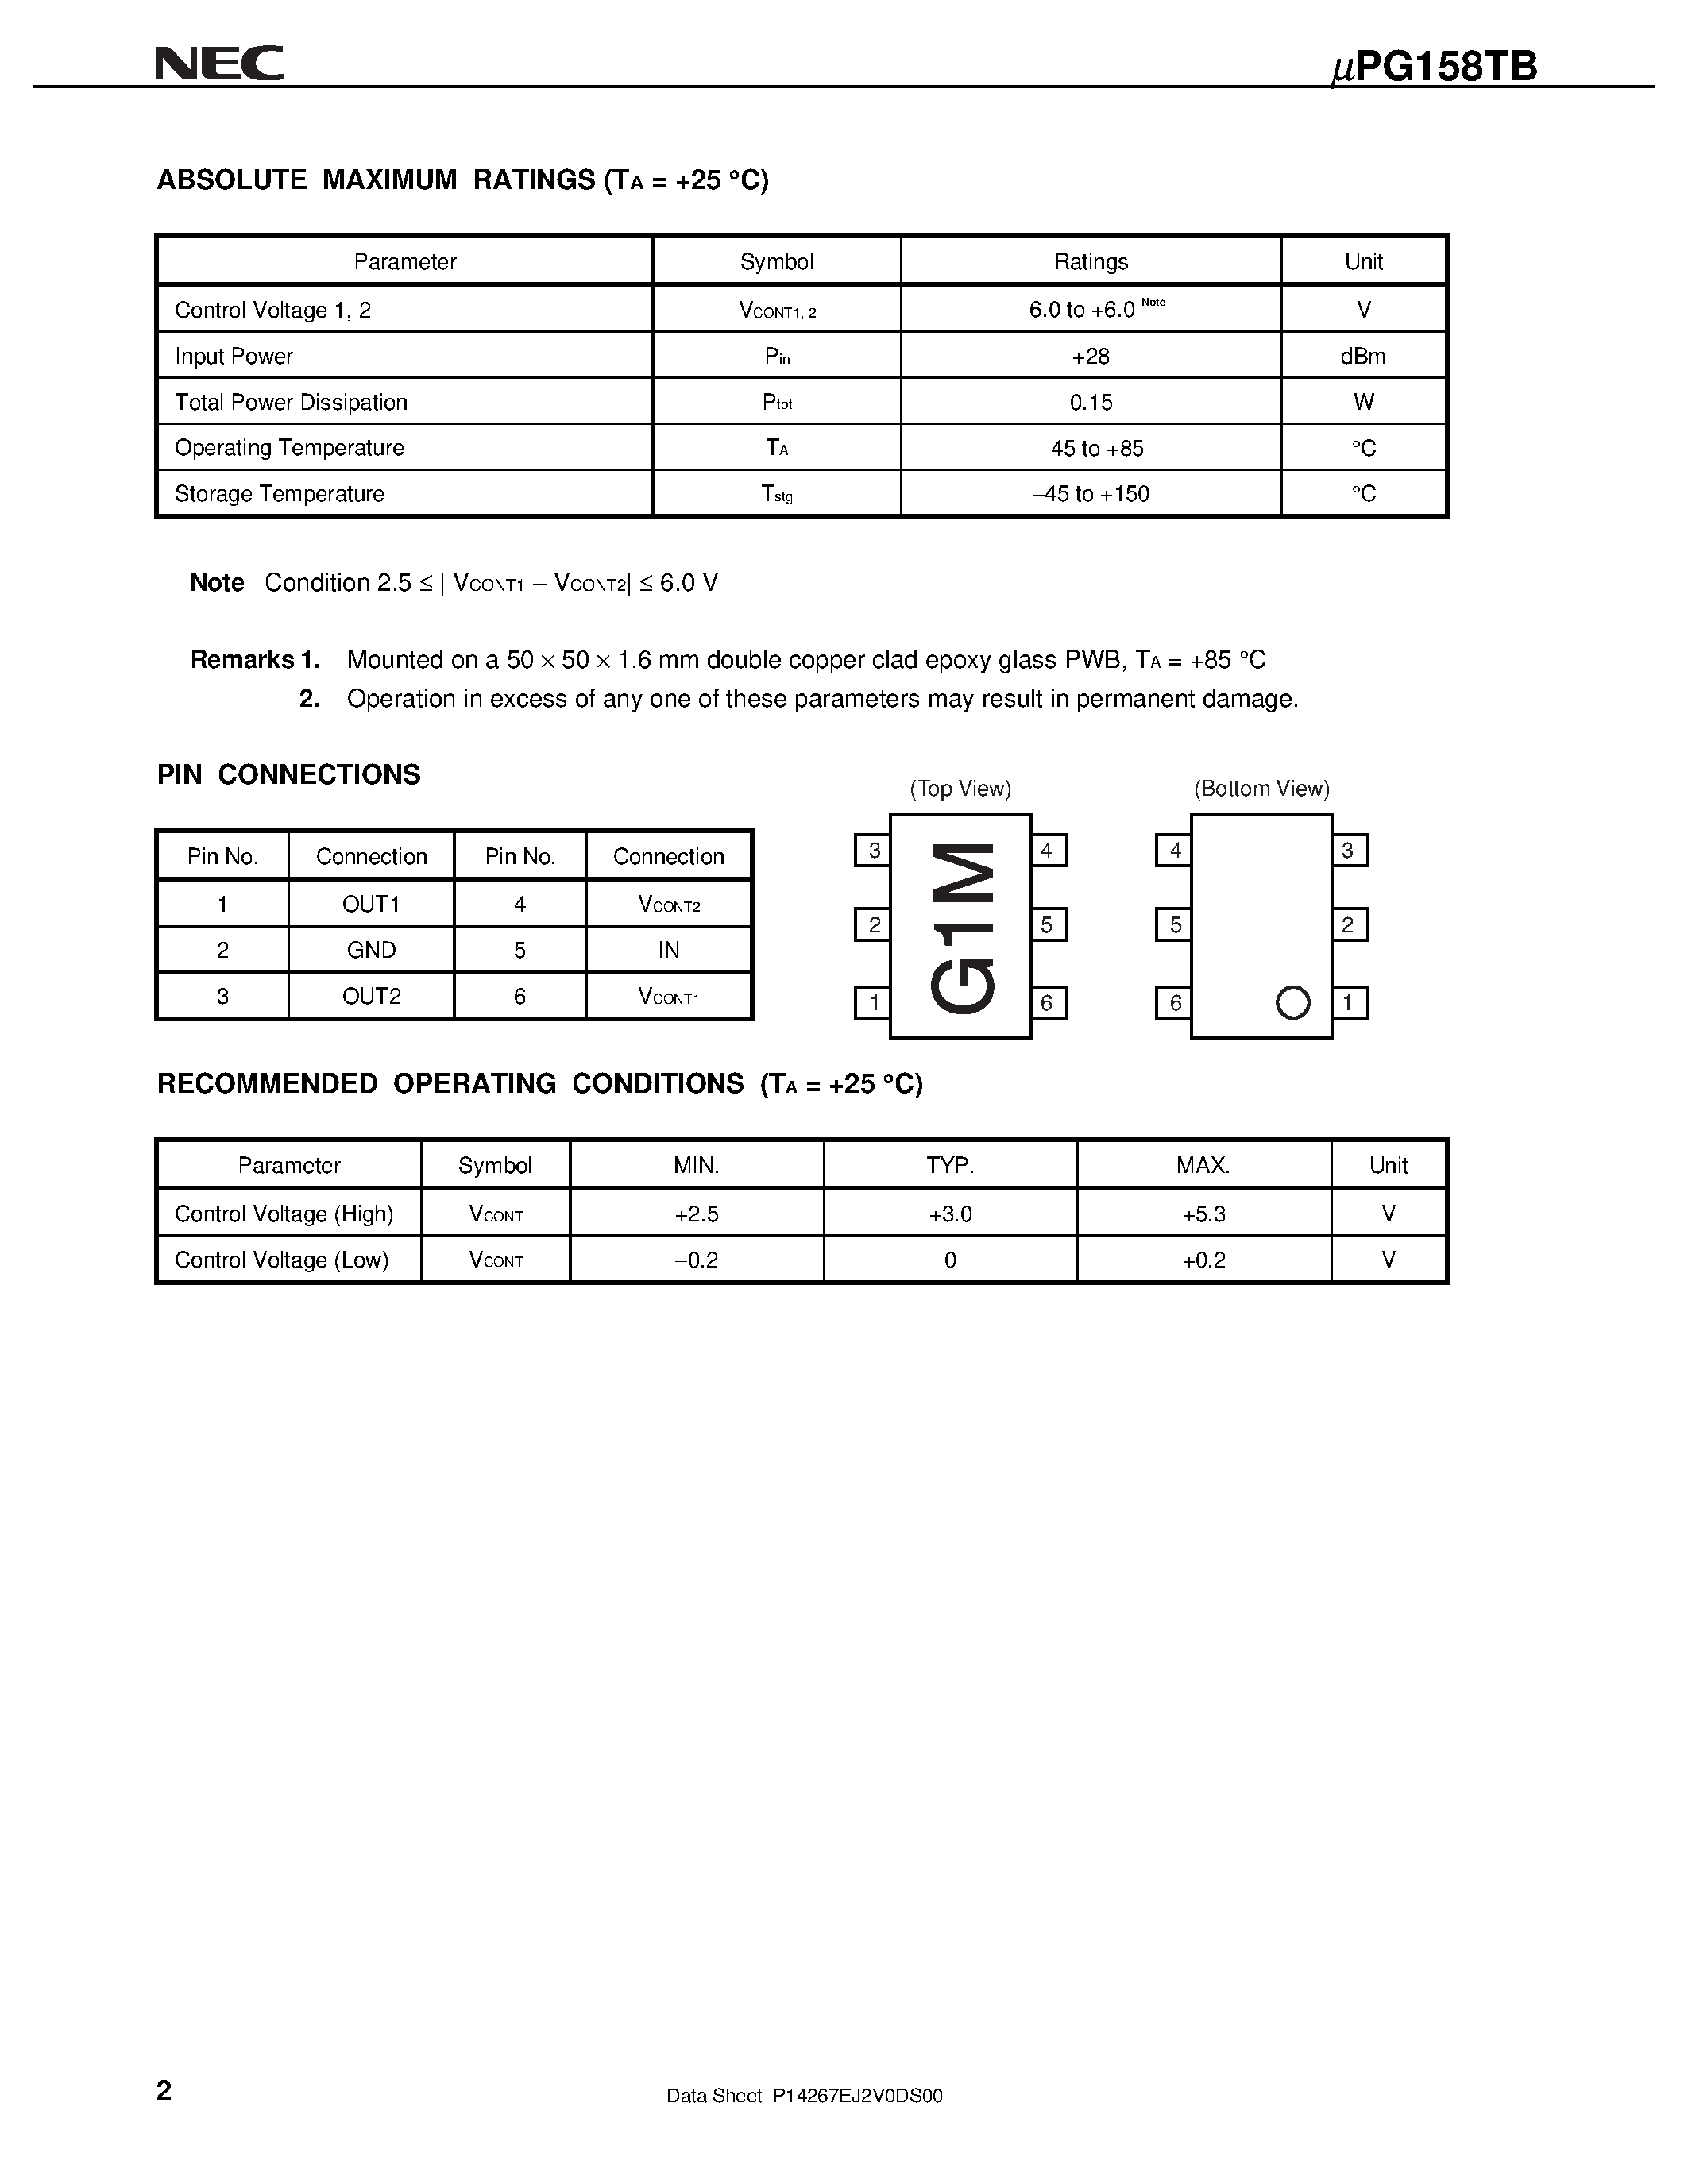 Datasheet UPG158 - L/ S- BAND SPDT SWITCH page 2